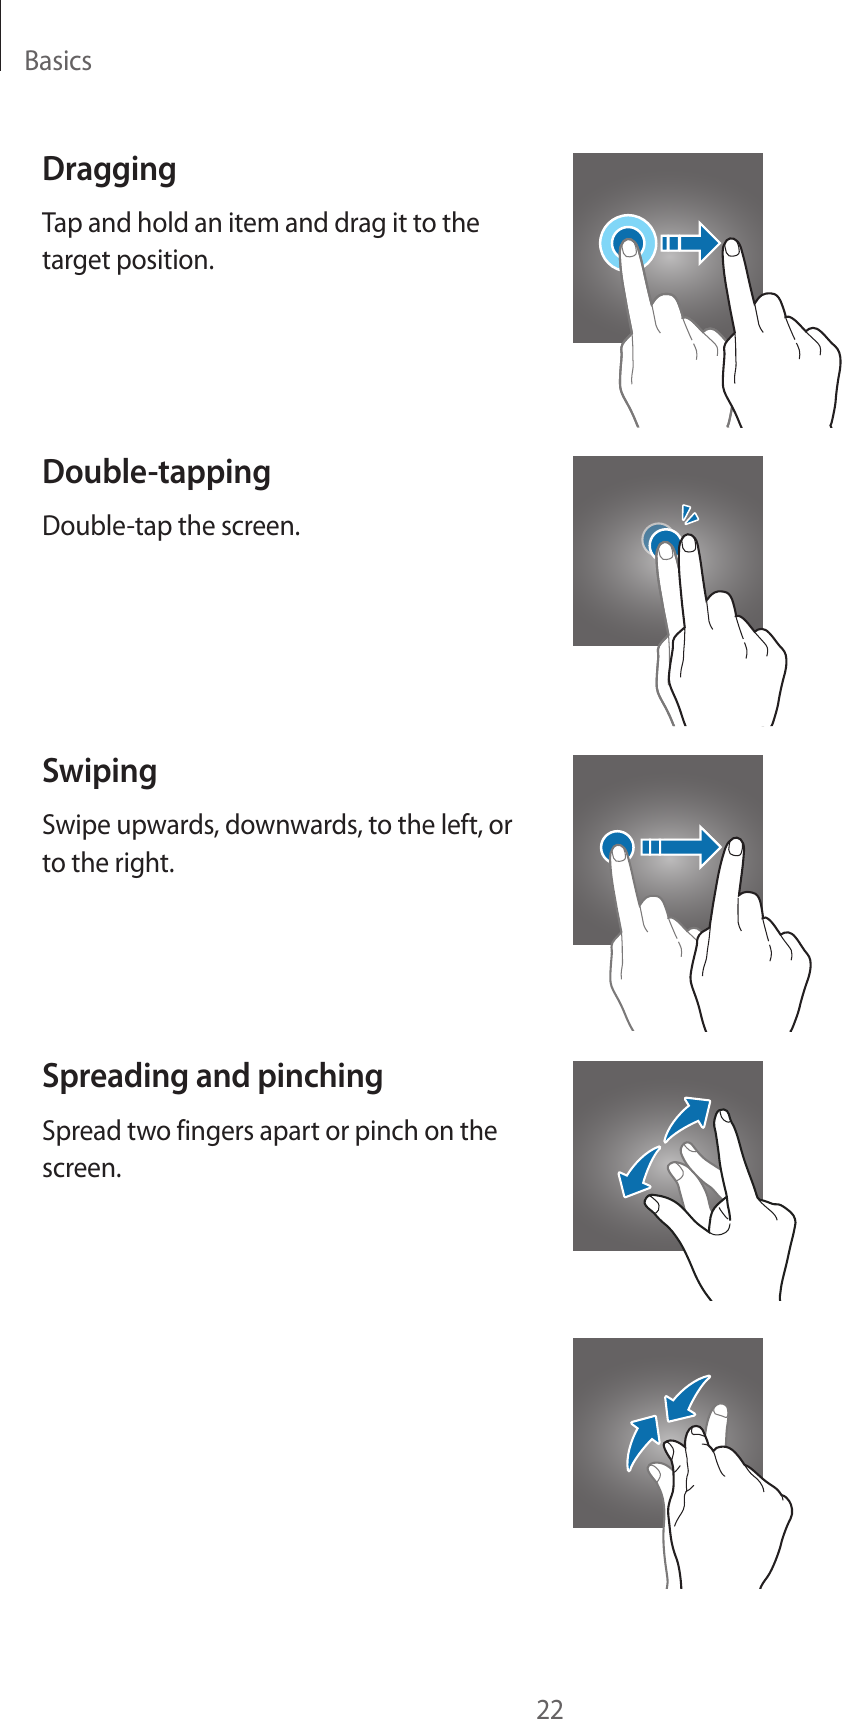 Basics22DraggingTap and hold an item and drag it to the target position.Double-tappingDouble-tap the screen.SwipingSwipe upwards, downwards, to the left, or to the right.Spreading and pinchingSpread two fingers apart or pinch on the screen.